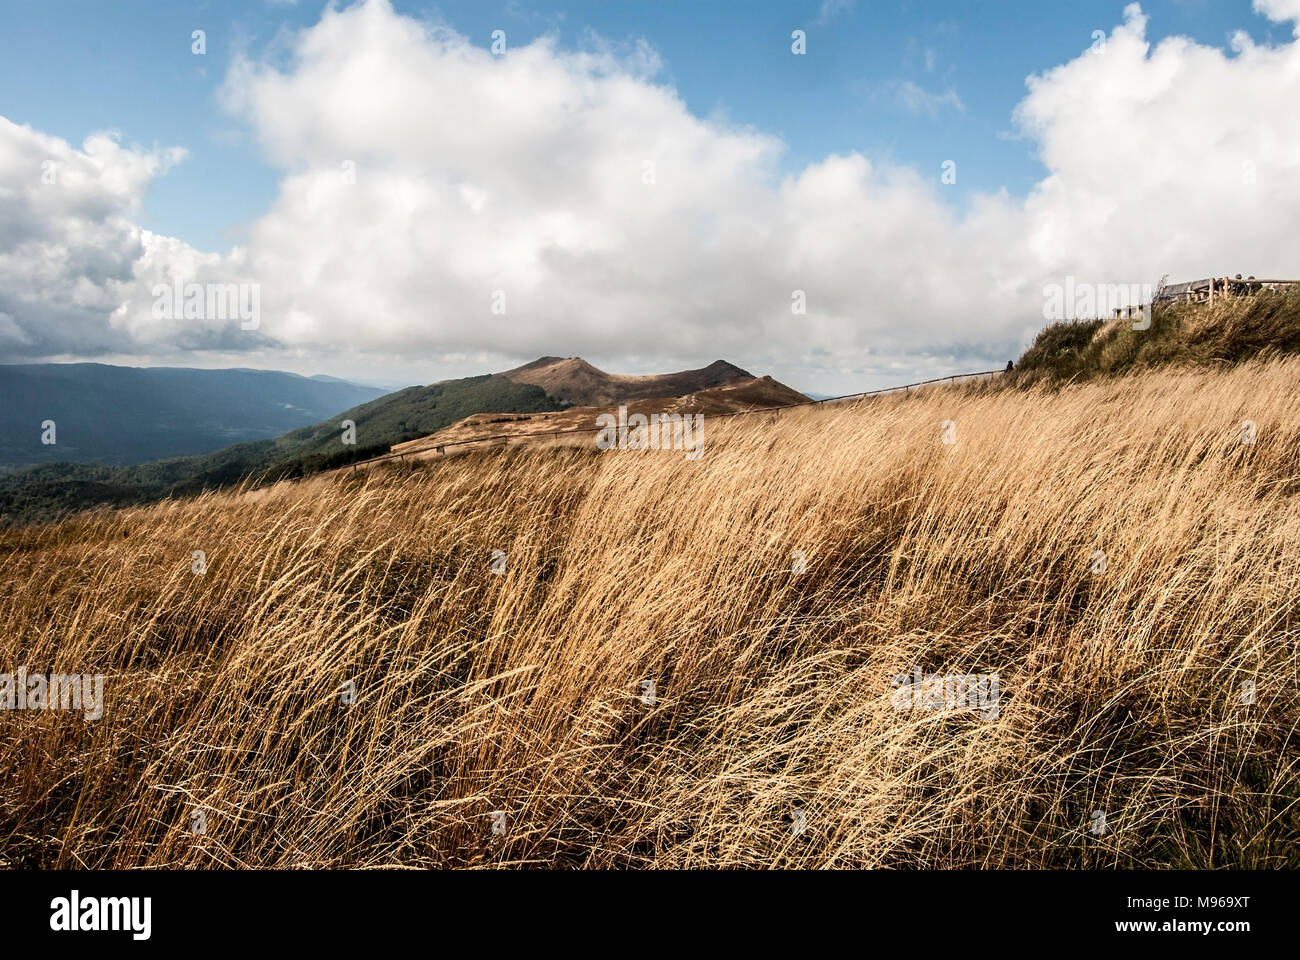 autumn Polonina Wetlinska from hiking trail near Chatka Puchatka in Bieszczady mountains in Poland with mountain meadow, hills and blue sky with cloud Stock Photo